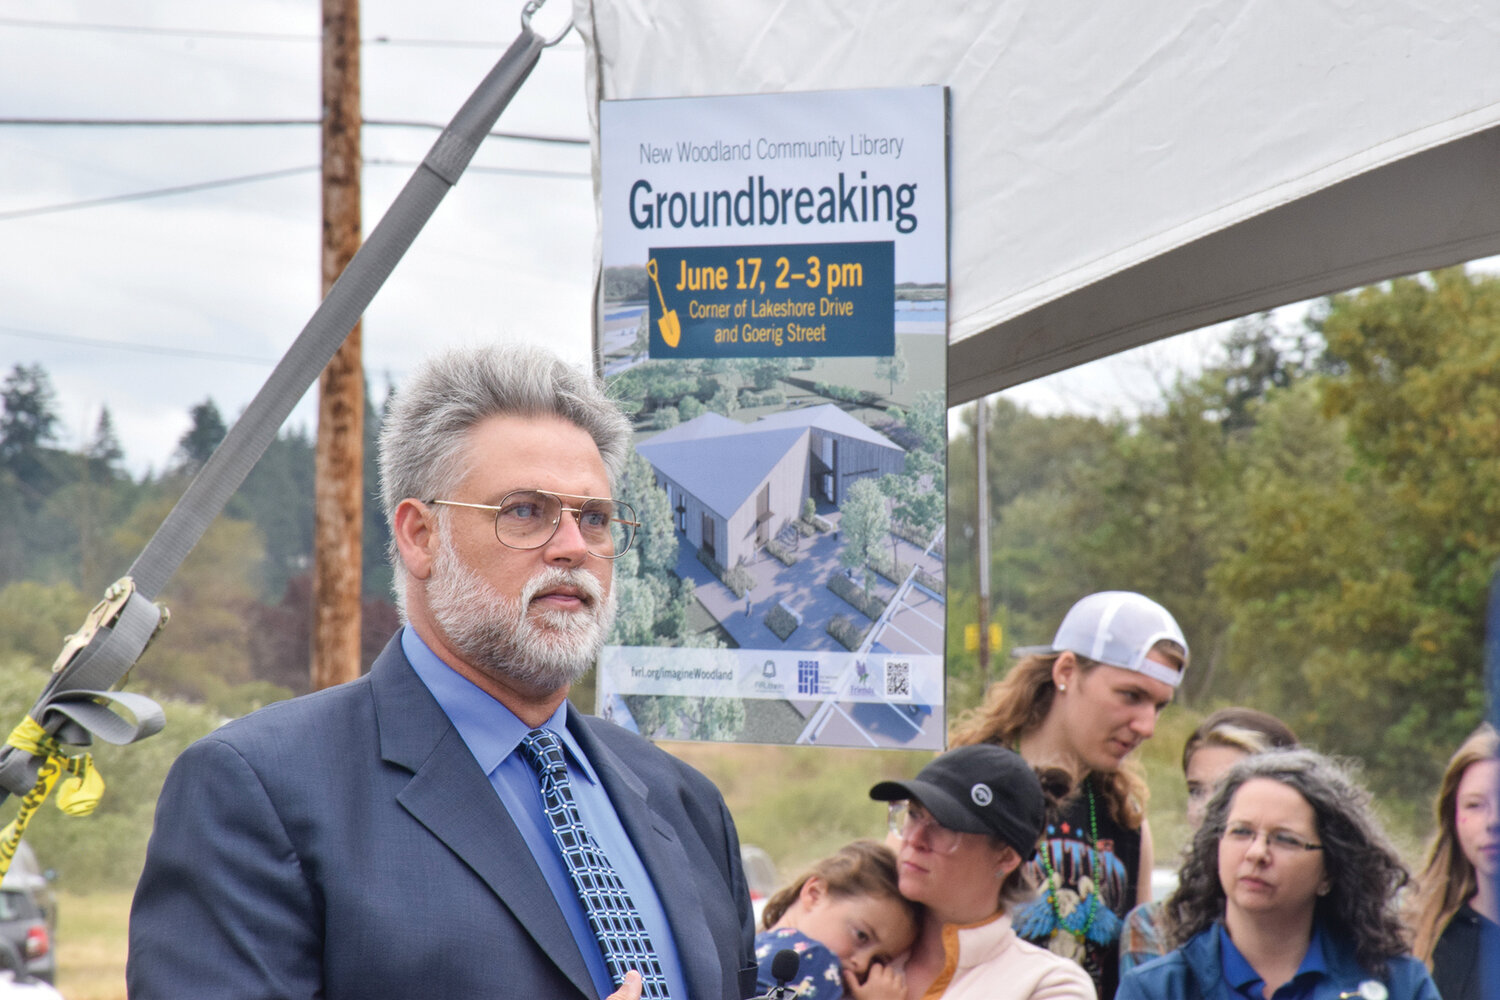 Washington State Rep. Ed Orcutt, R-Kalama, left, speaks among a crowd gathered for the  groundbreaking of the Woodland Community Library on June 17.